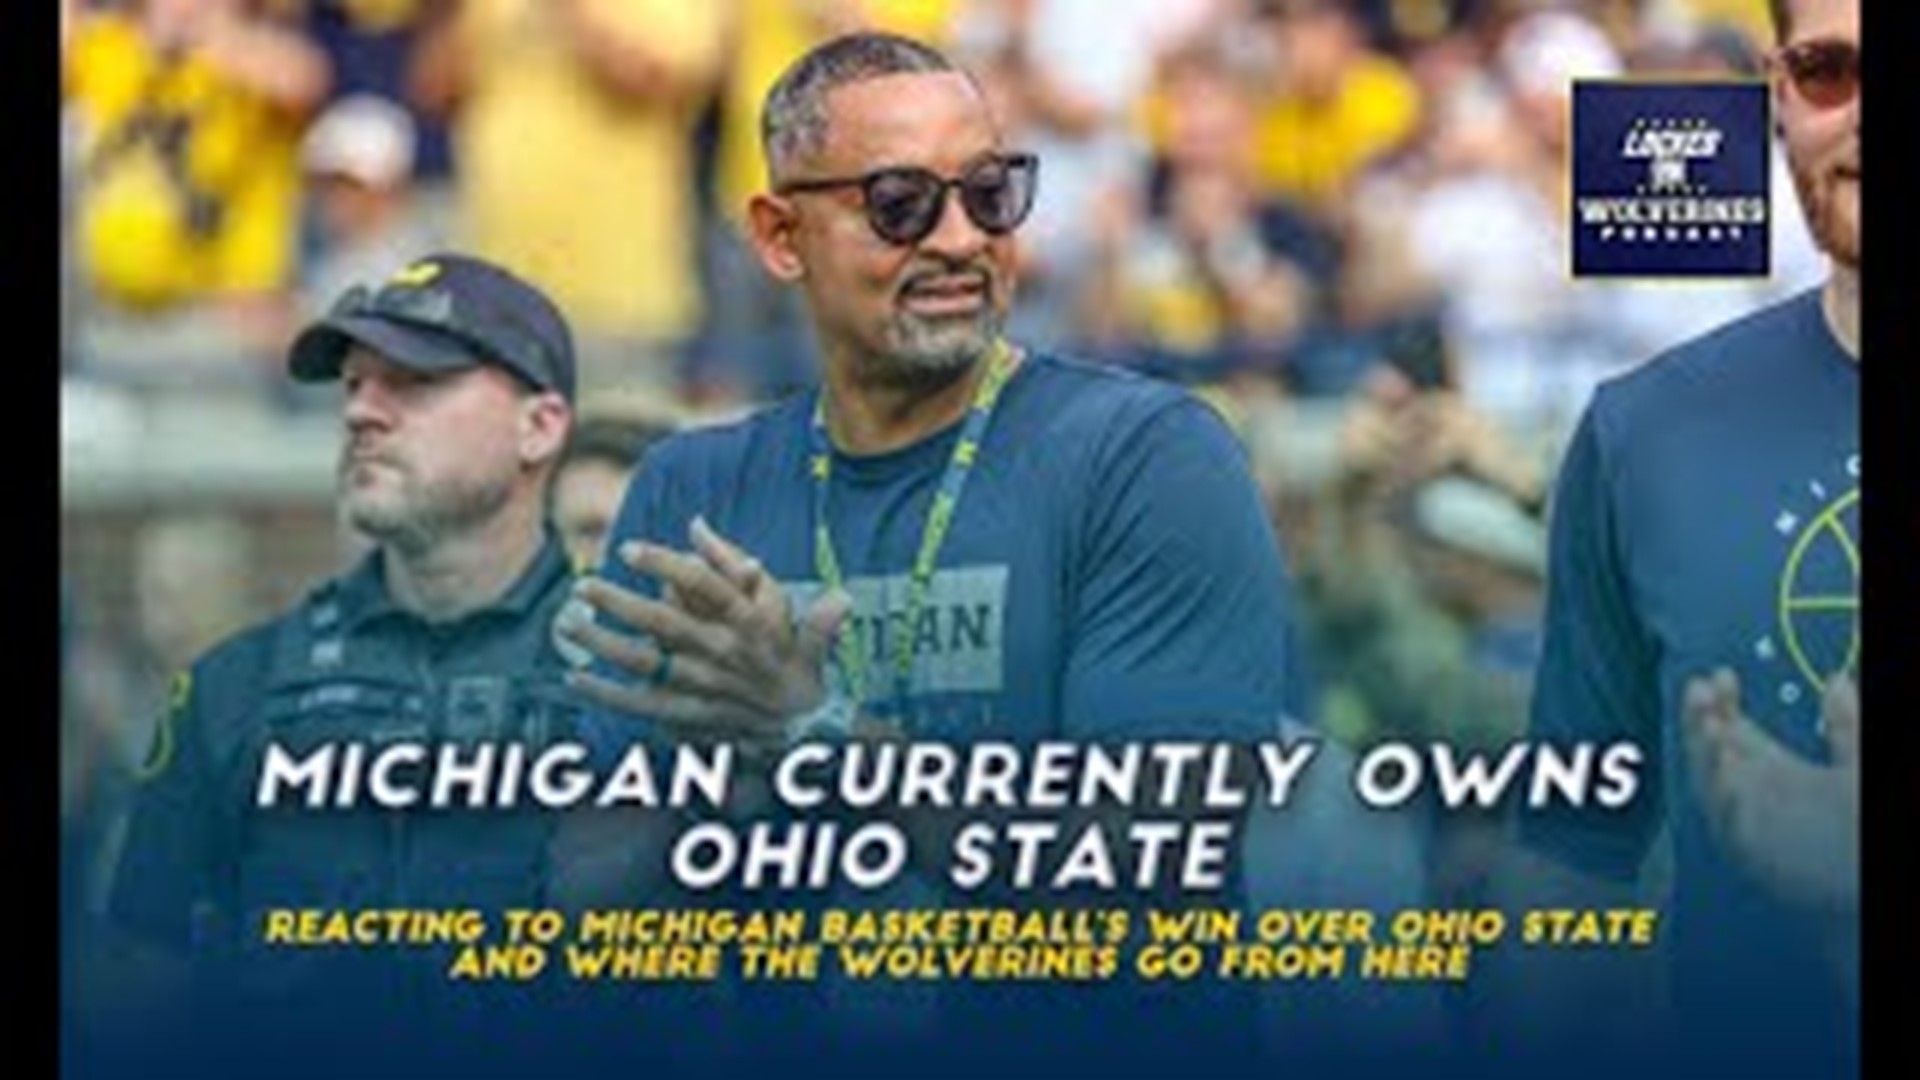 Just like the Michigan football team, Michigan basketball has now beaten Ohio State two times in a row -- one time at Crisler, another one at the Schott.